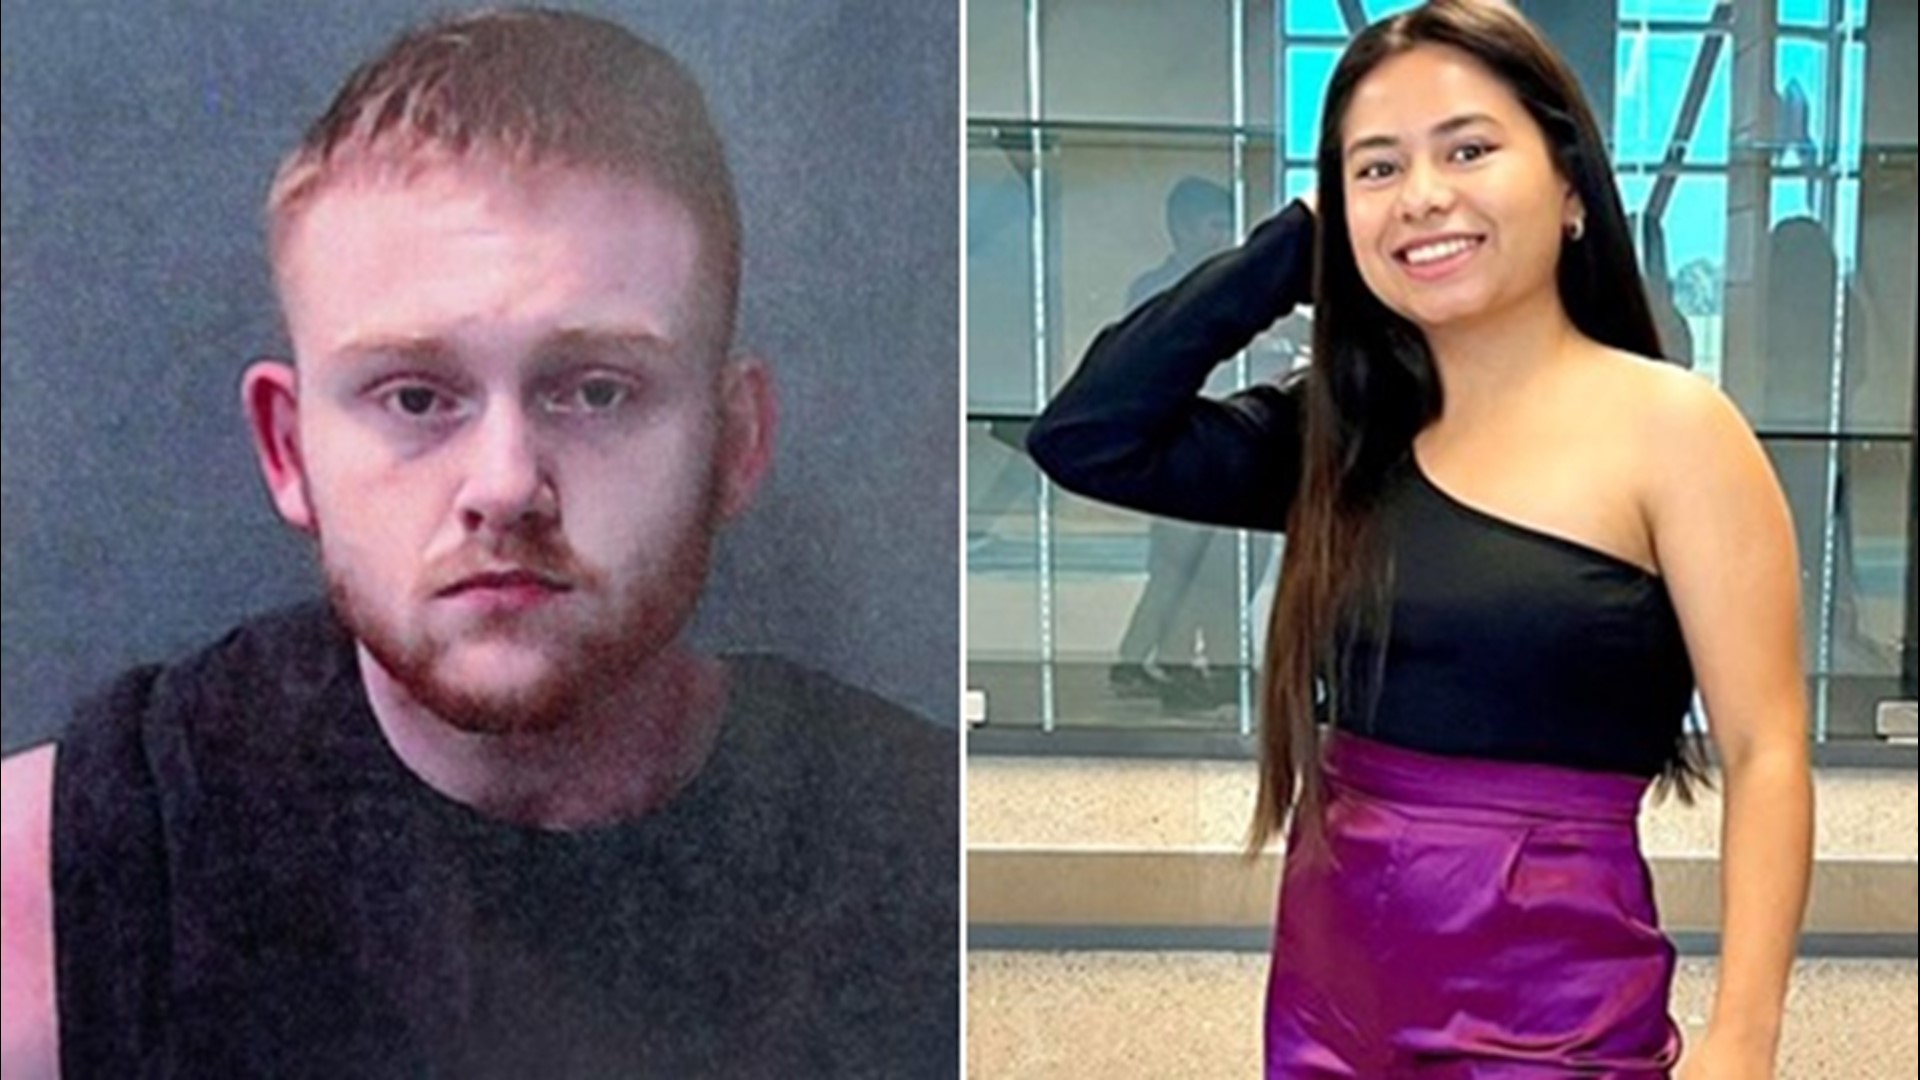 Investigators said Jared Dicus, 21, used a kitchen knife to decapitate Anggy Diaz, 21, at their Waller home a few months after they got married.